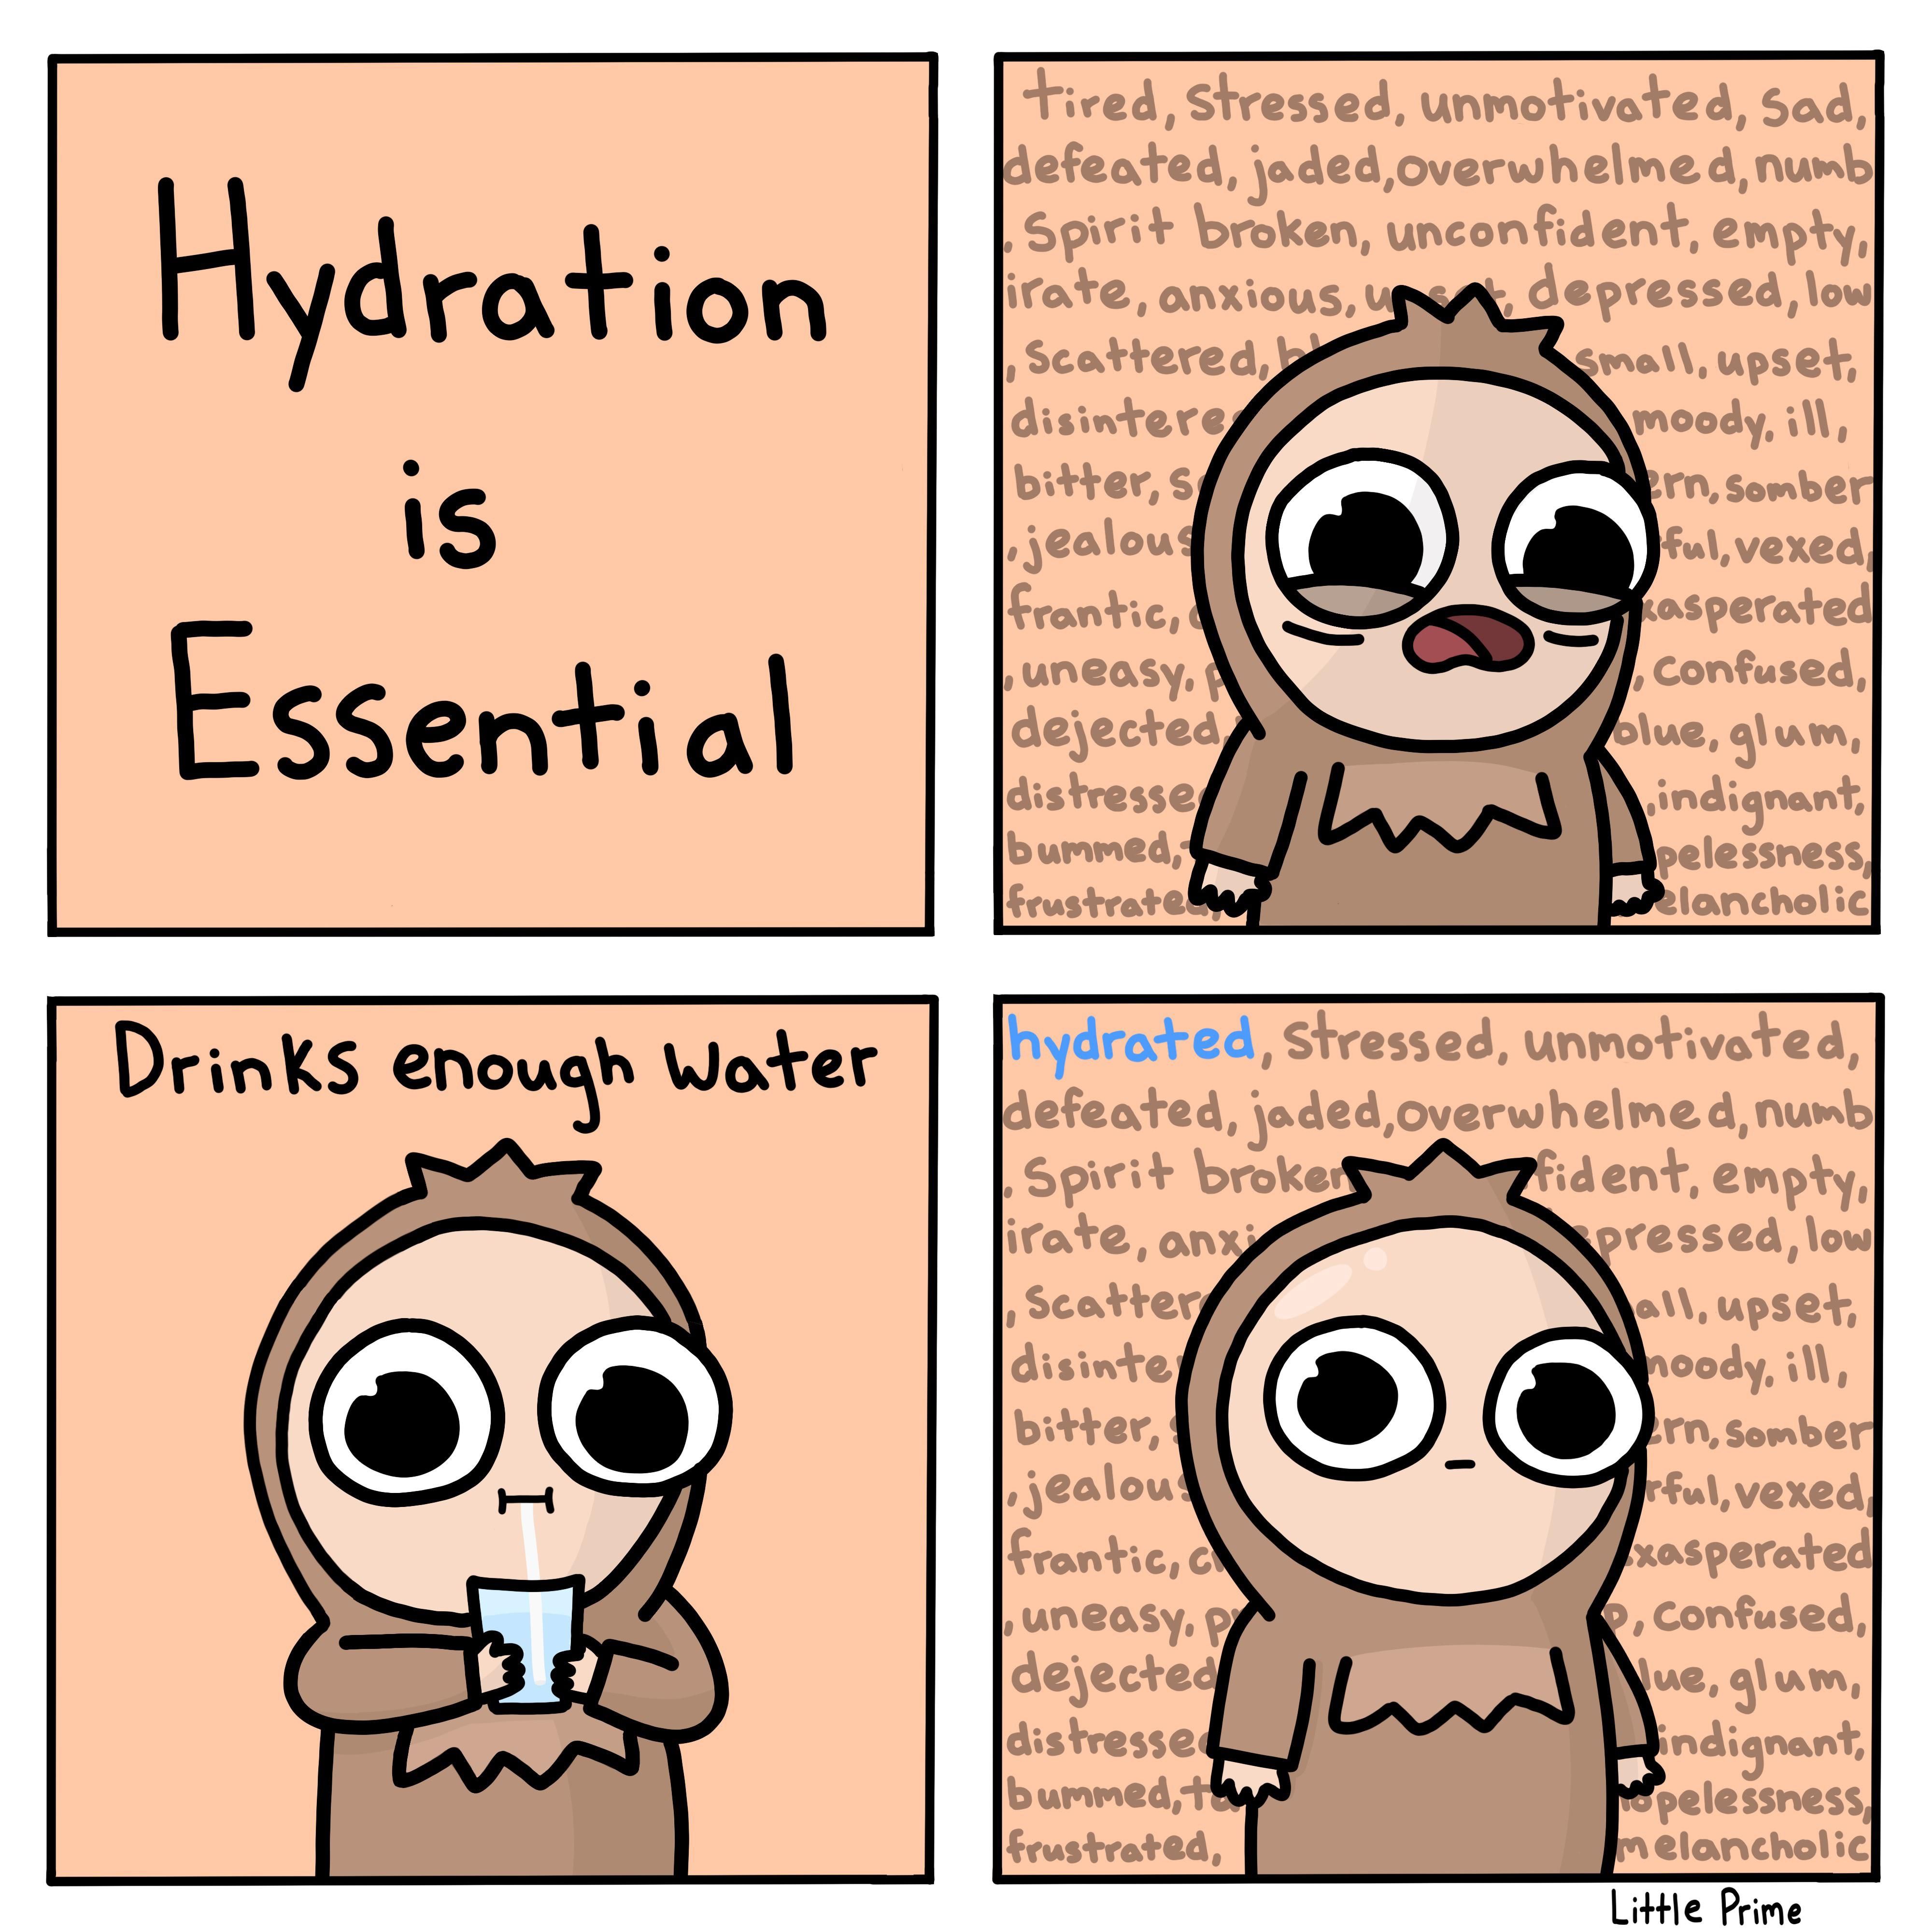 Just drink some water